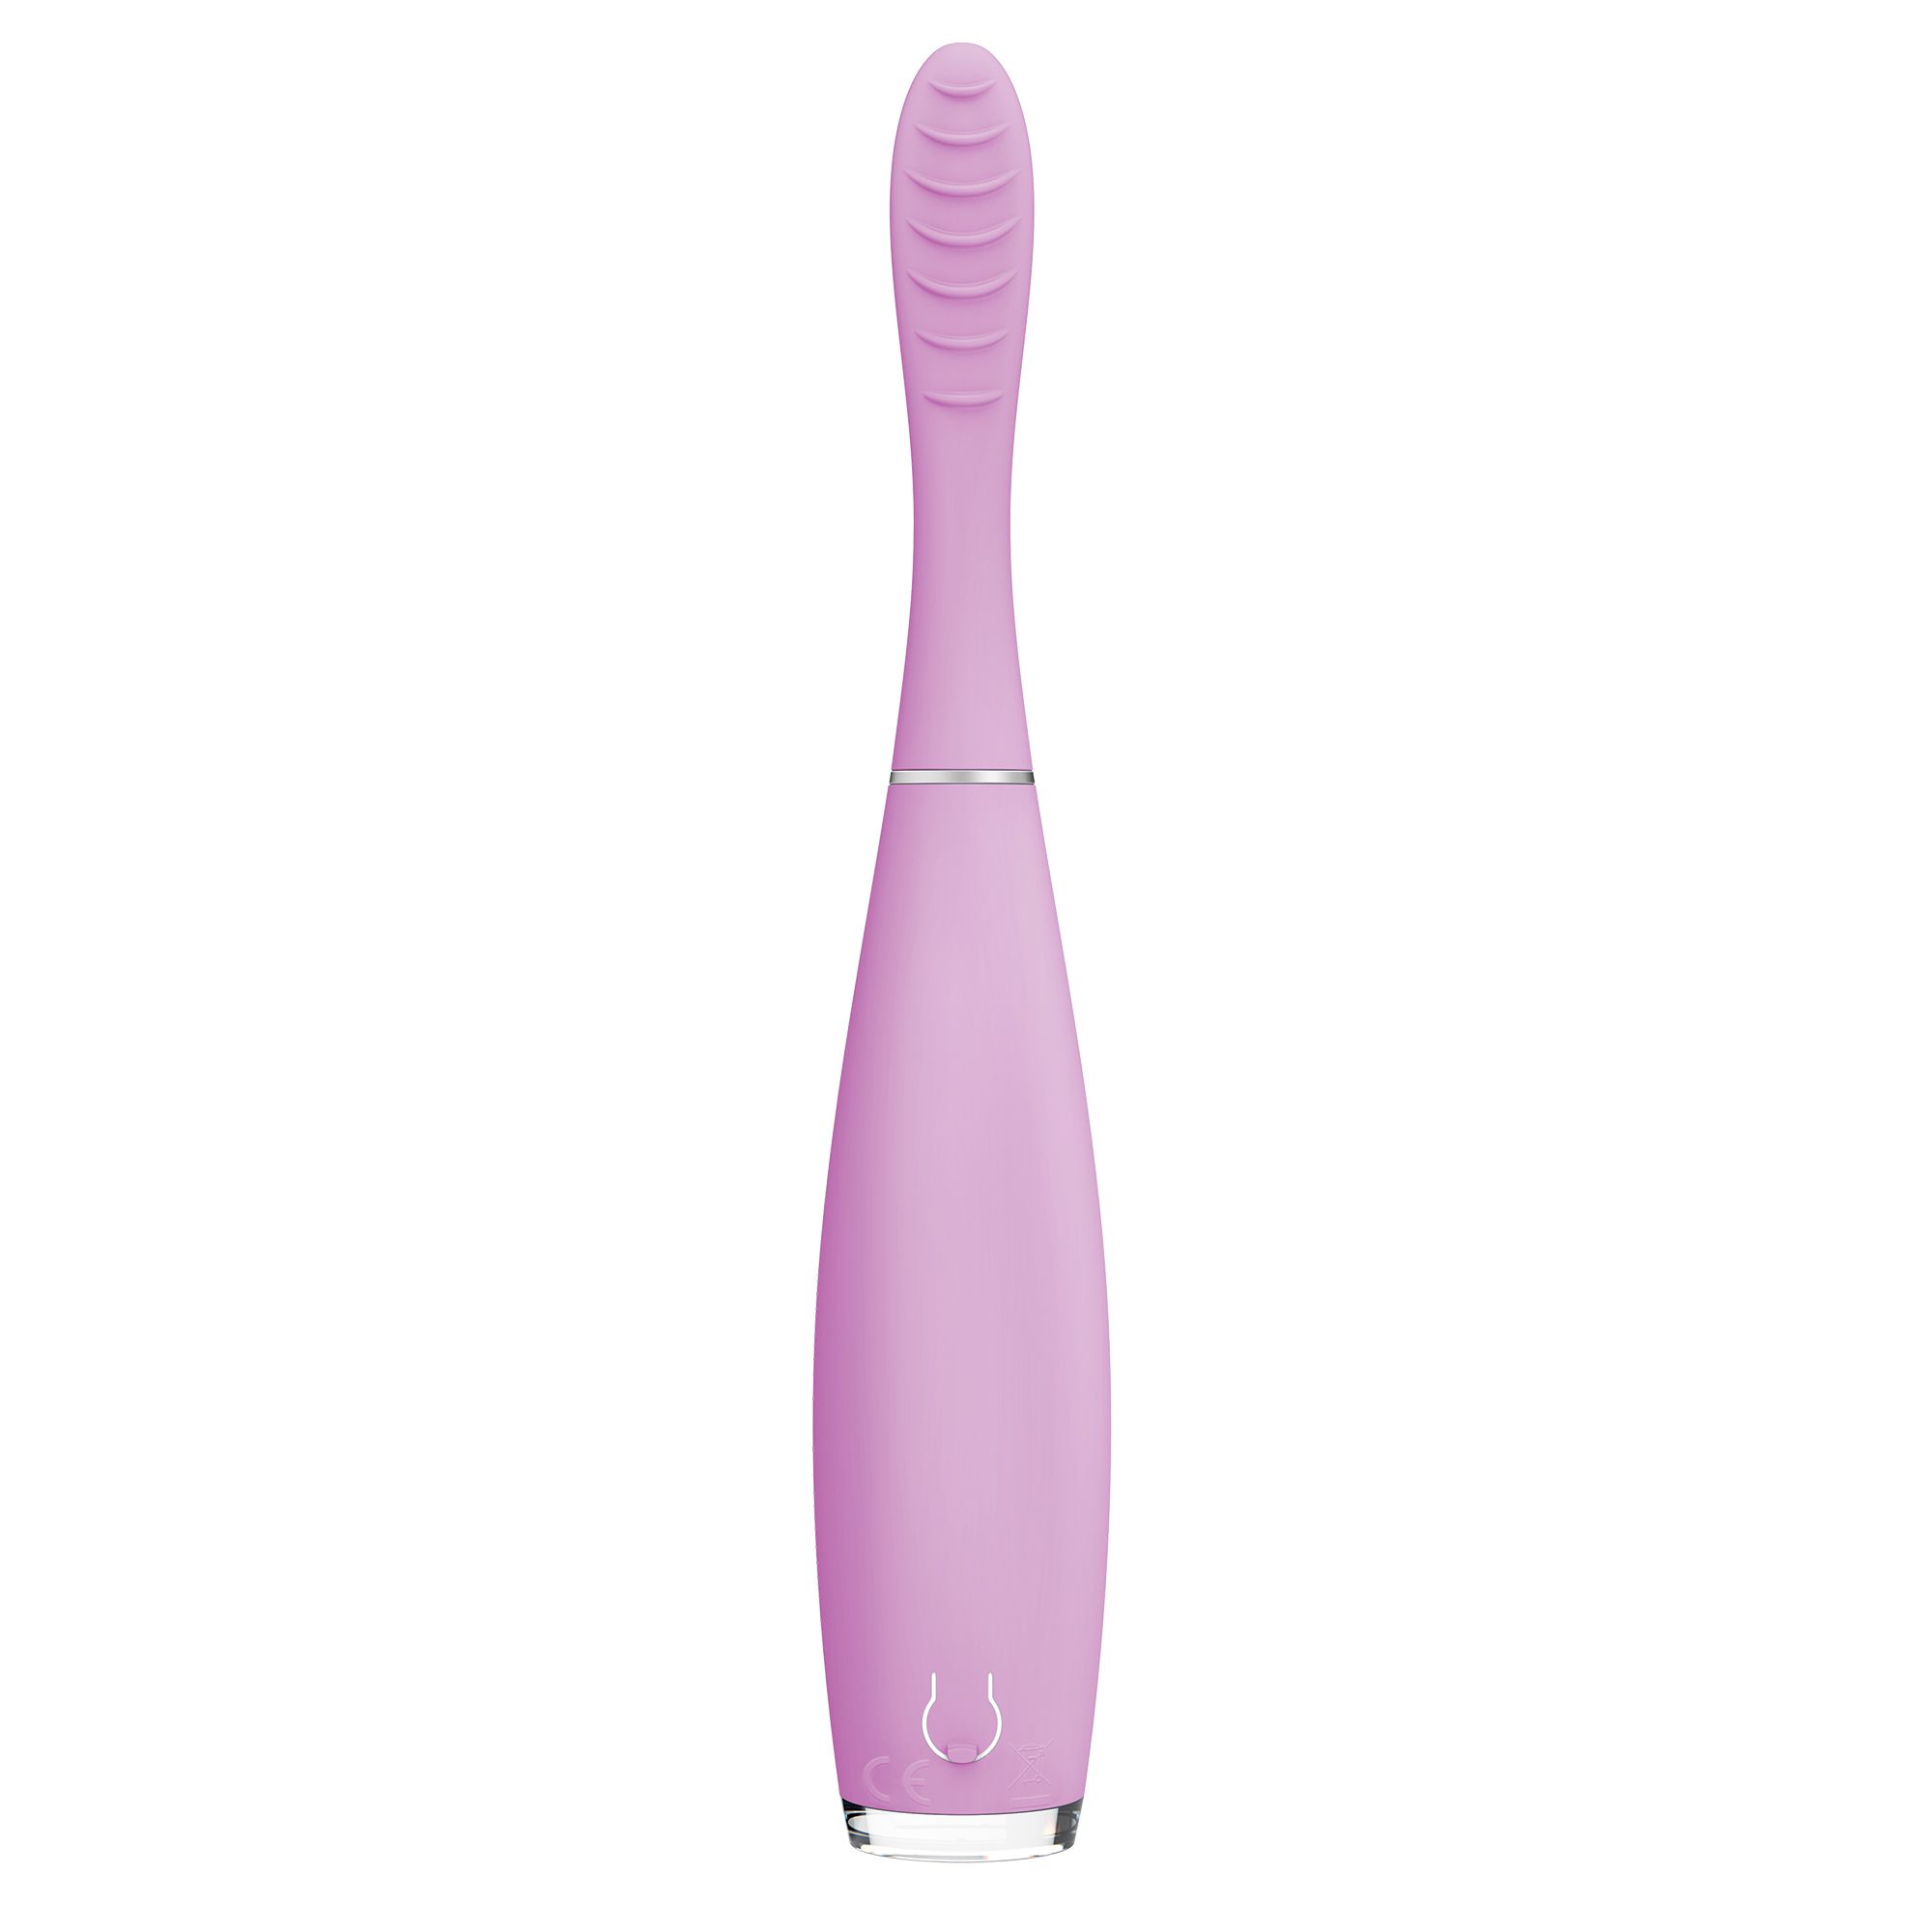    Foreo Issa, Lavender